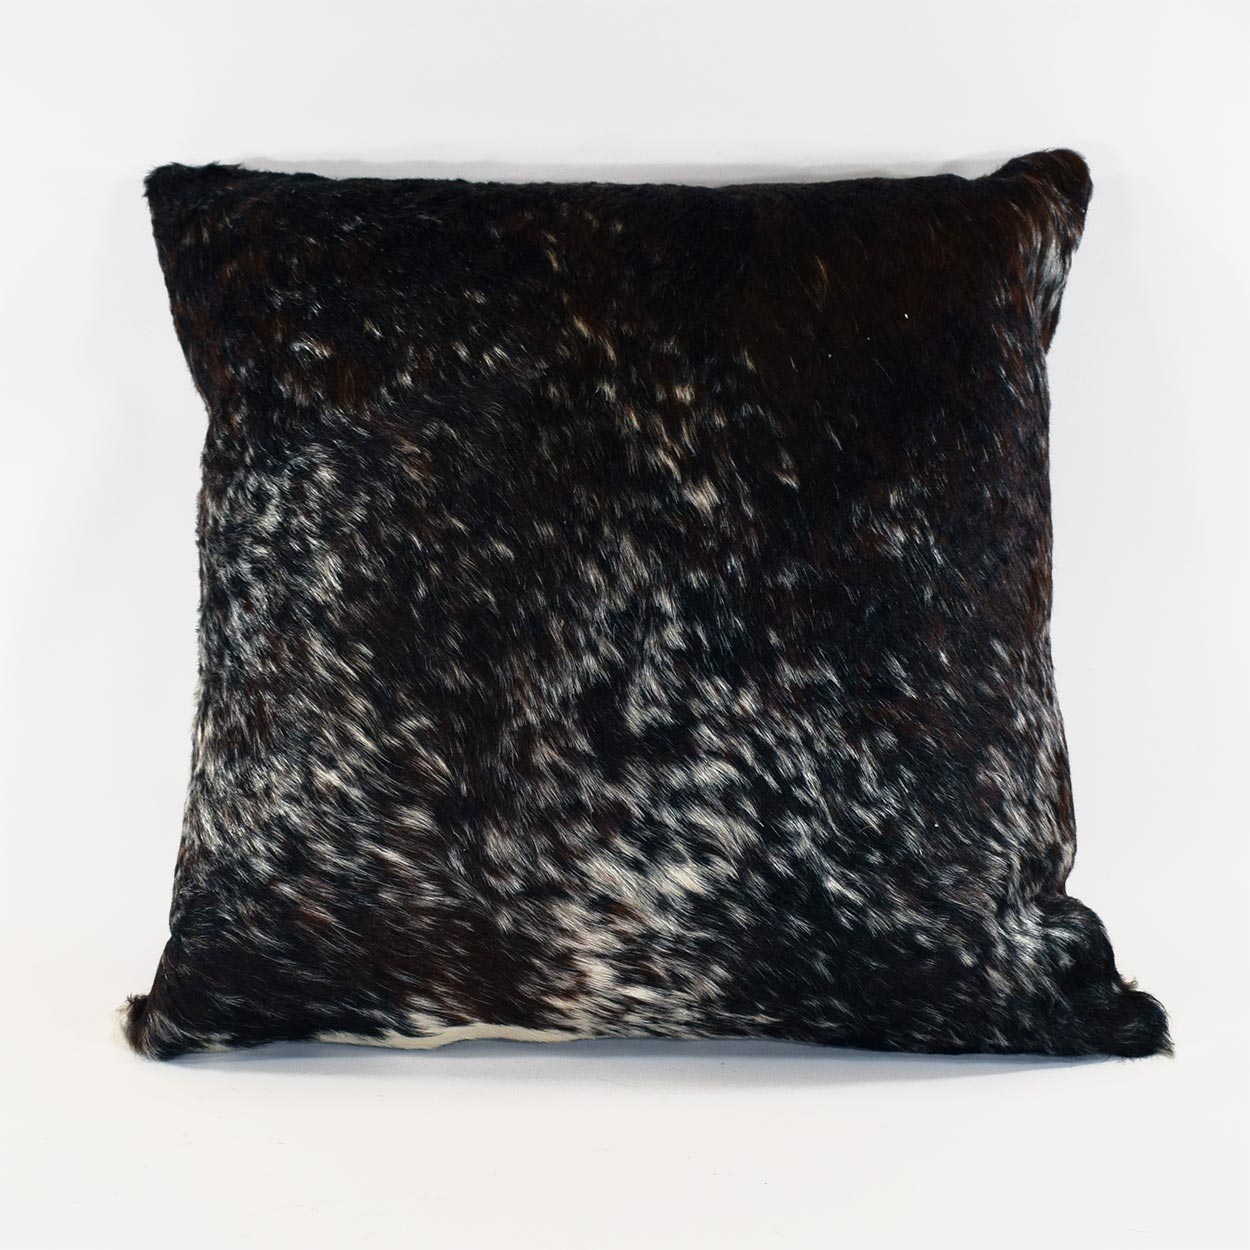 322029 - 20in x 20in Cowhide Pillow - Salt and Pepper Tri-color - Mostly Black